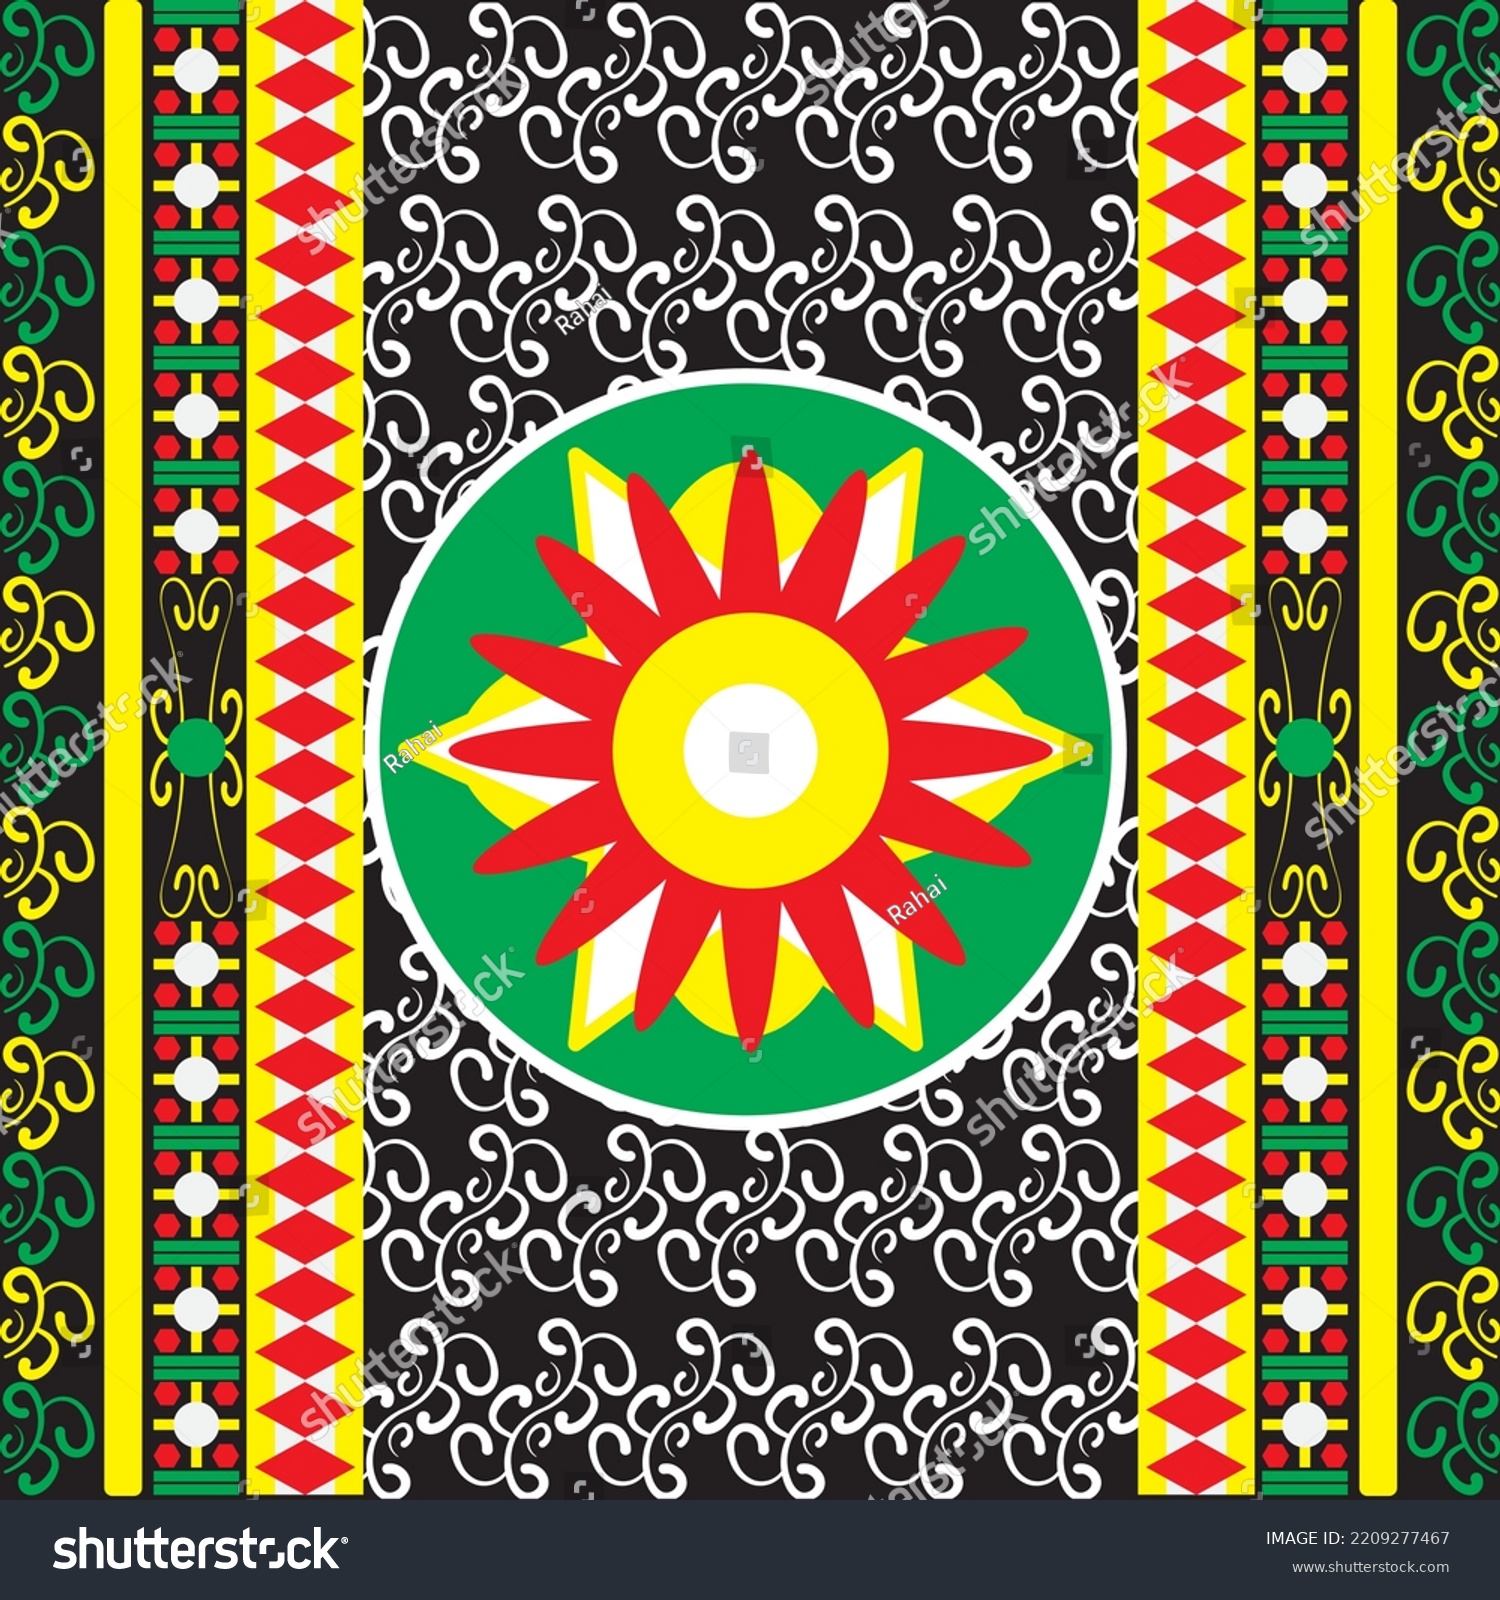 SVG of a typical cloth from aceh, indonesia called 